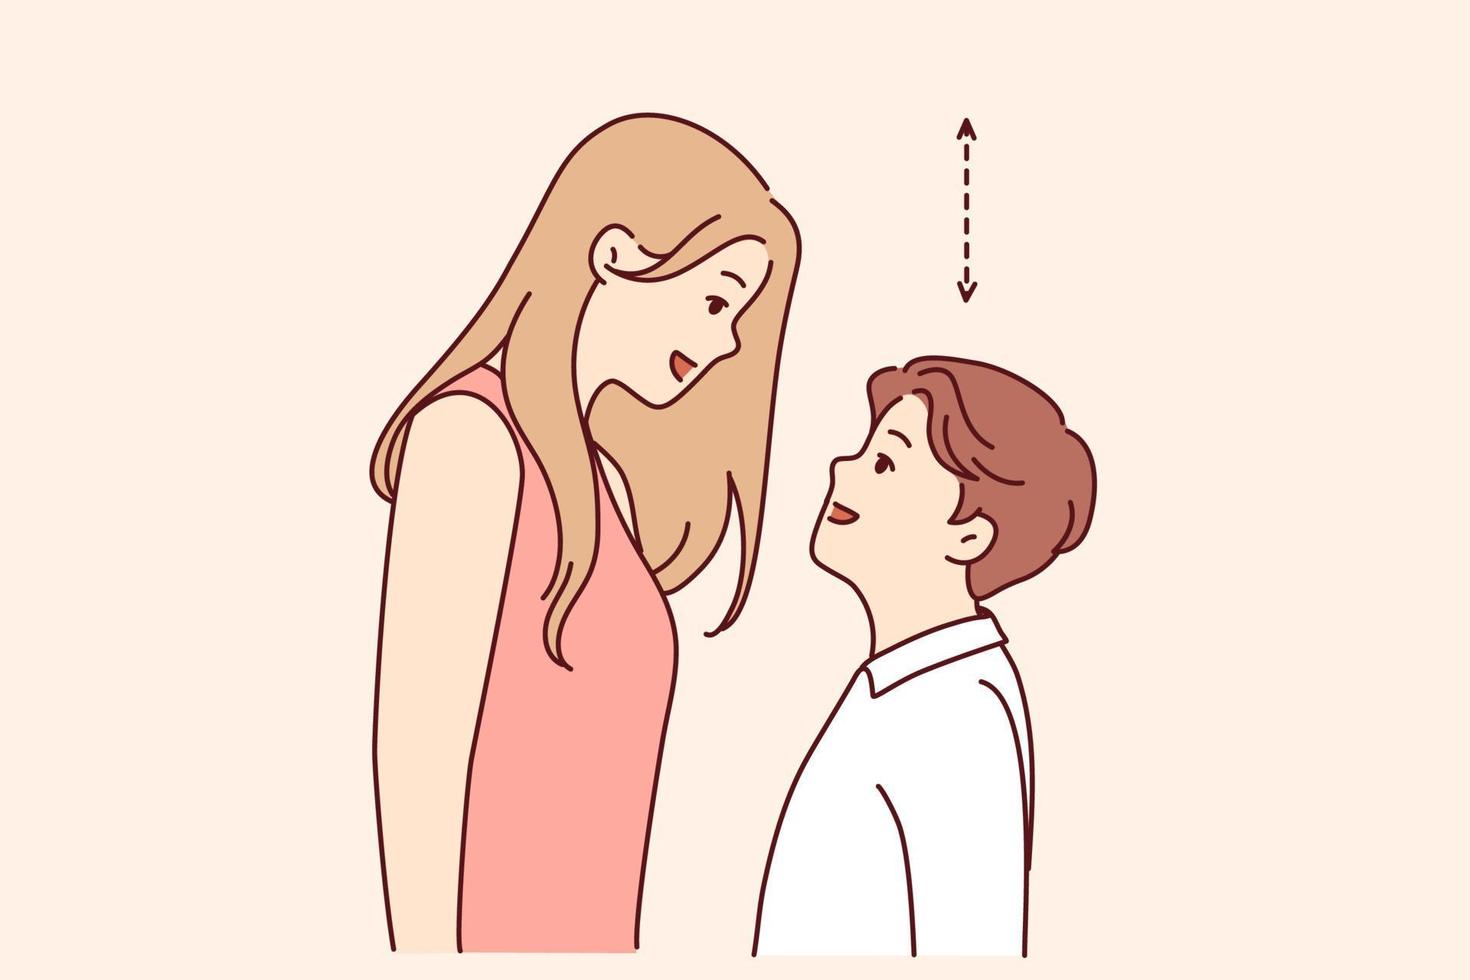 Couple with different height look in eyes. Tall woman and short man contrasting height. Relationship problem concept. Vector illustration.